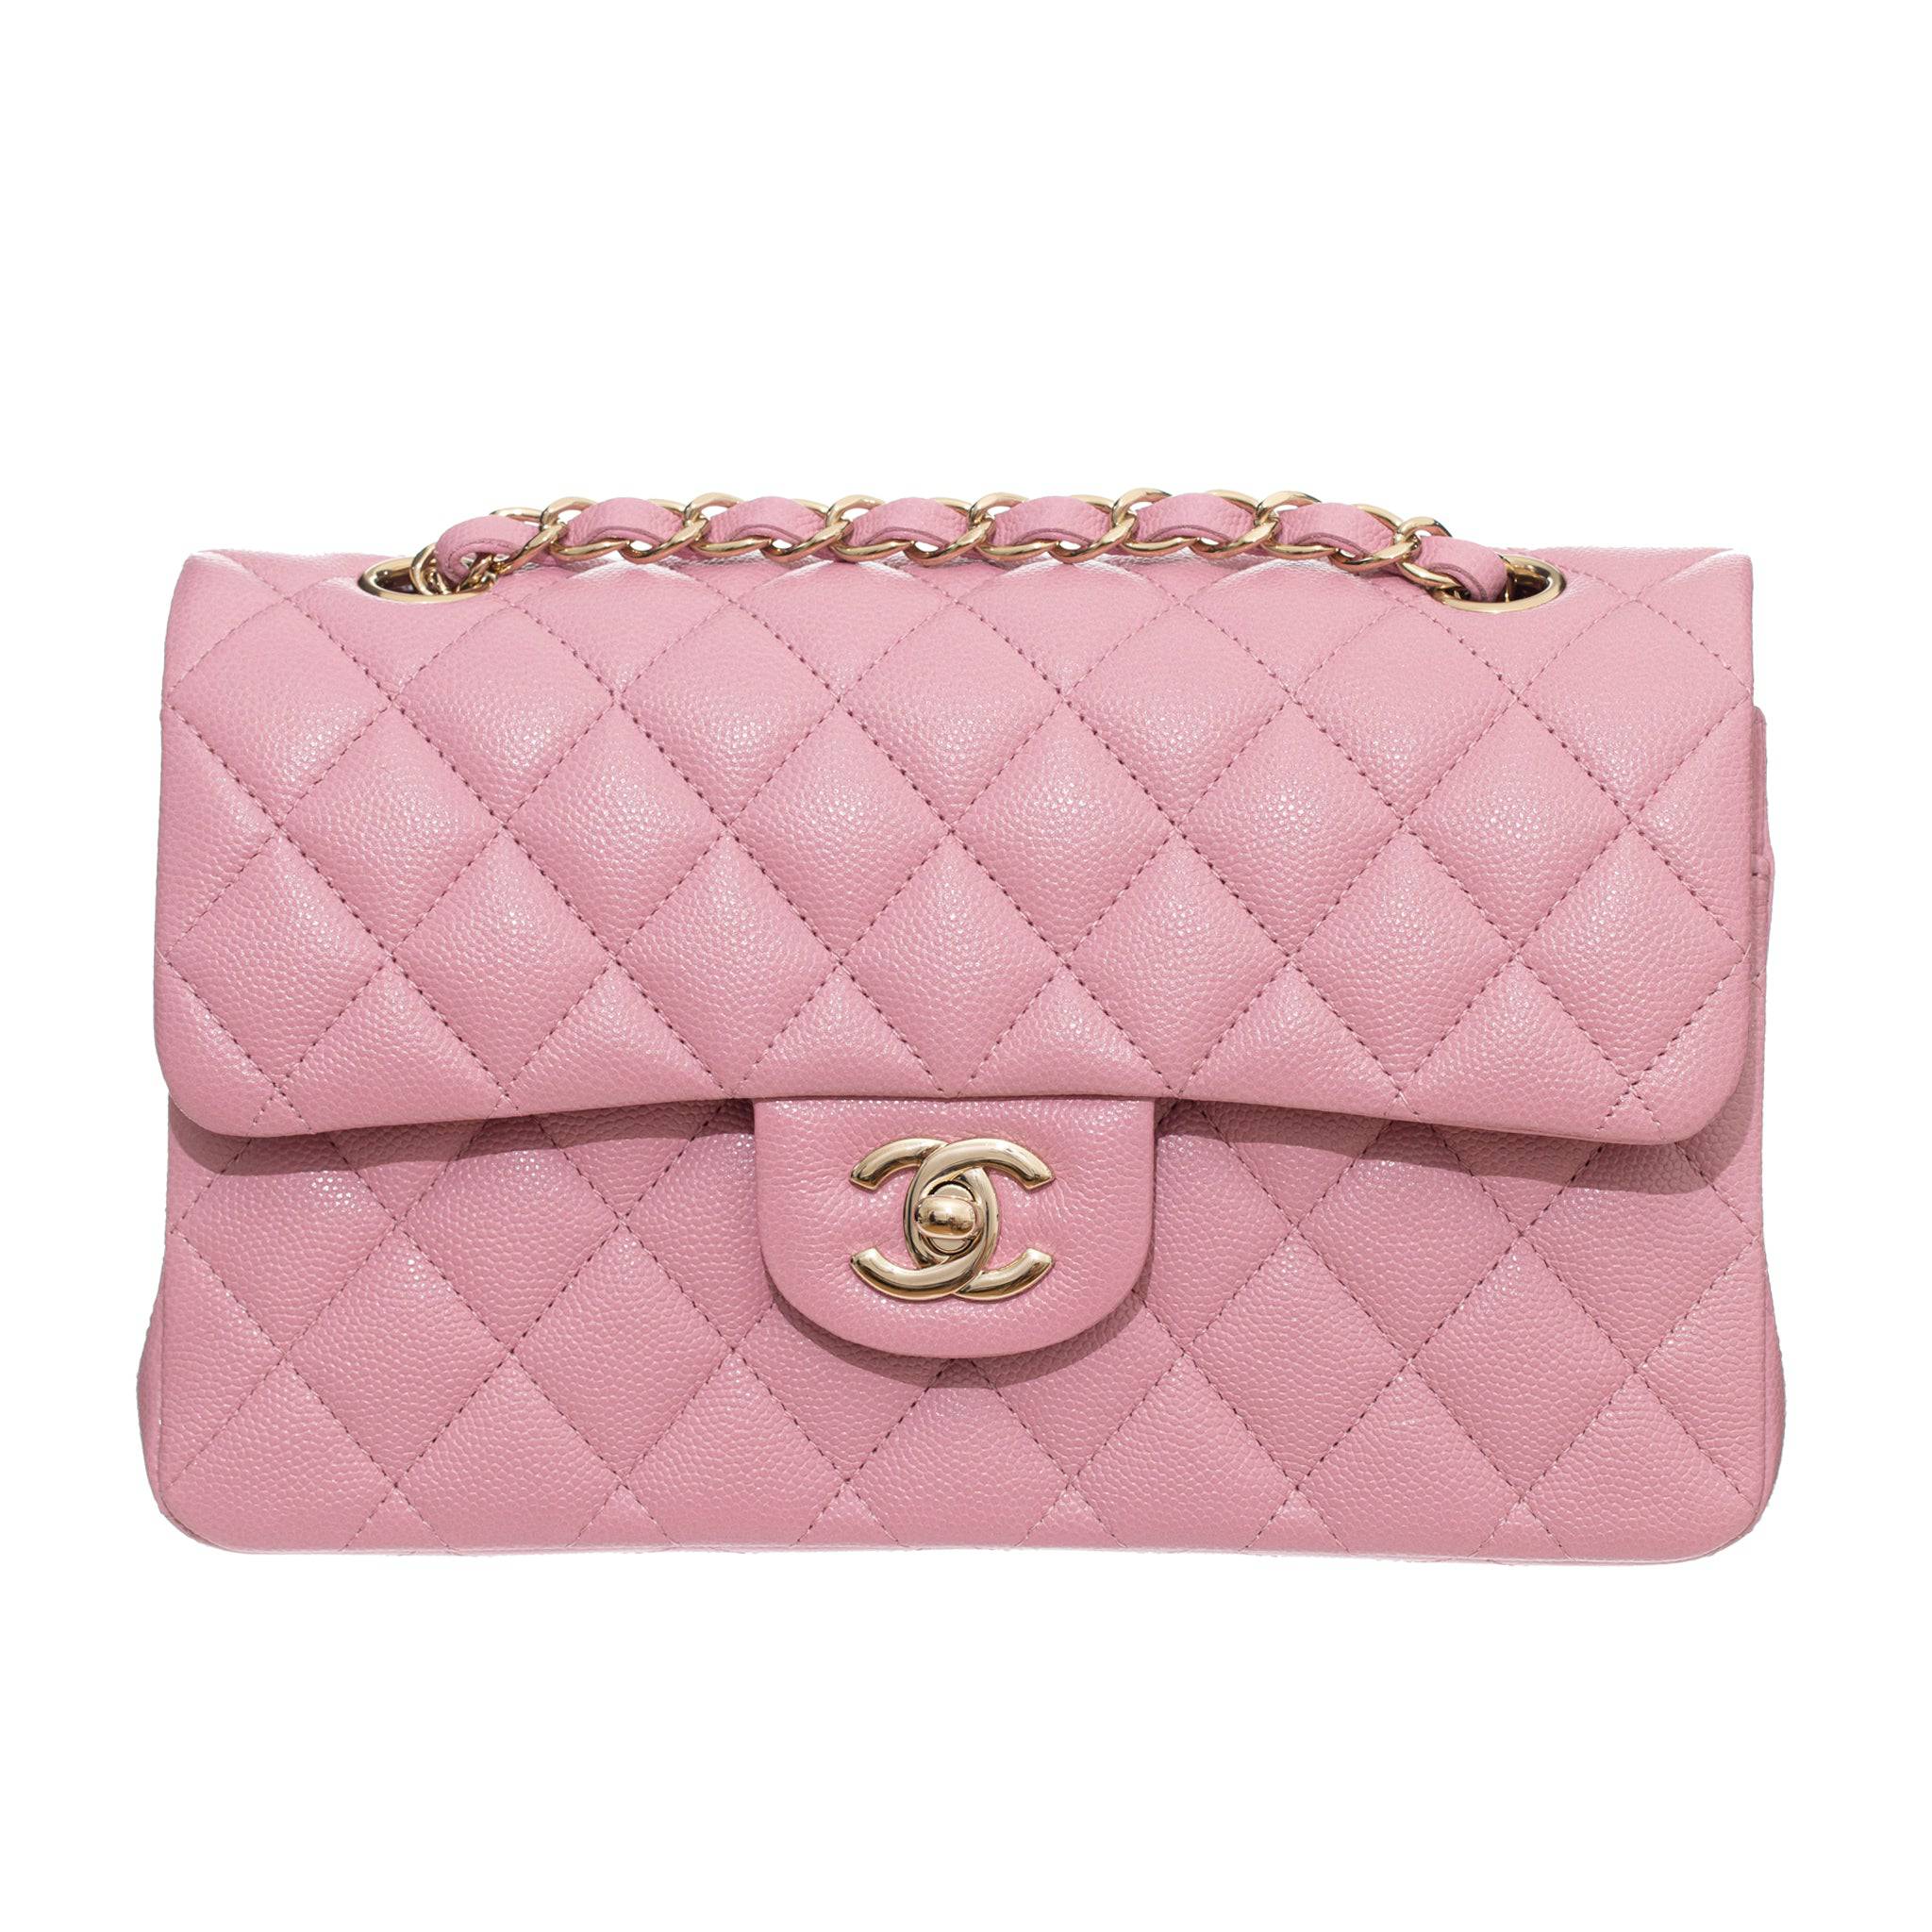 CHANEL DOUBLE CLASSIC FLAP PINK CAVIAR LEATHER CHAMPAGNE GOLD HARDWARE - On Repeat